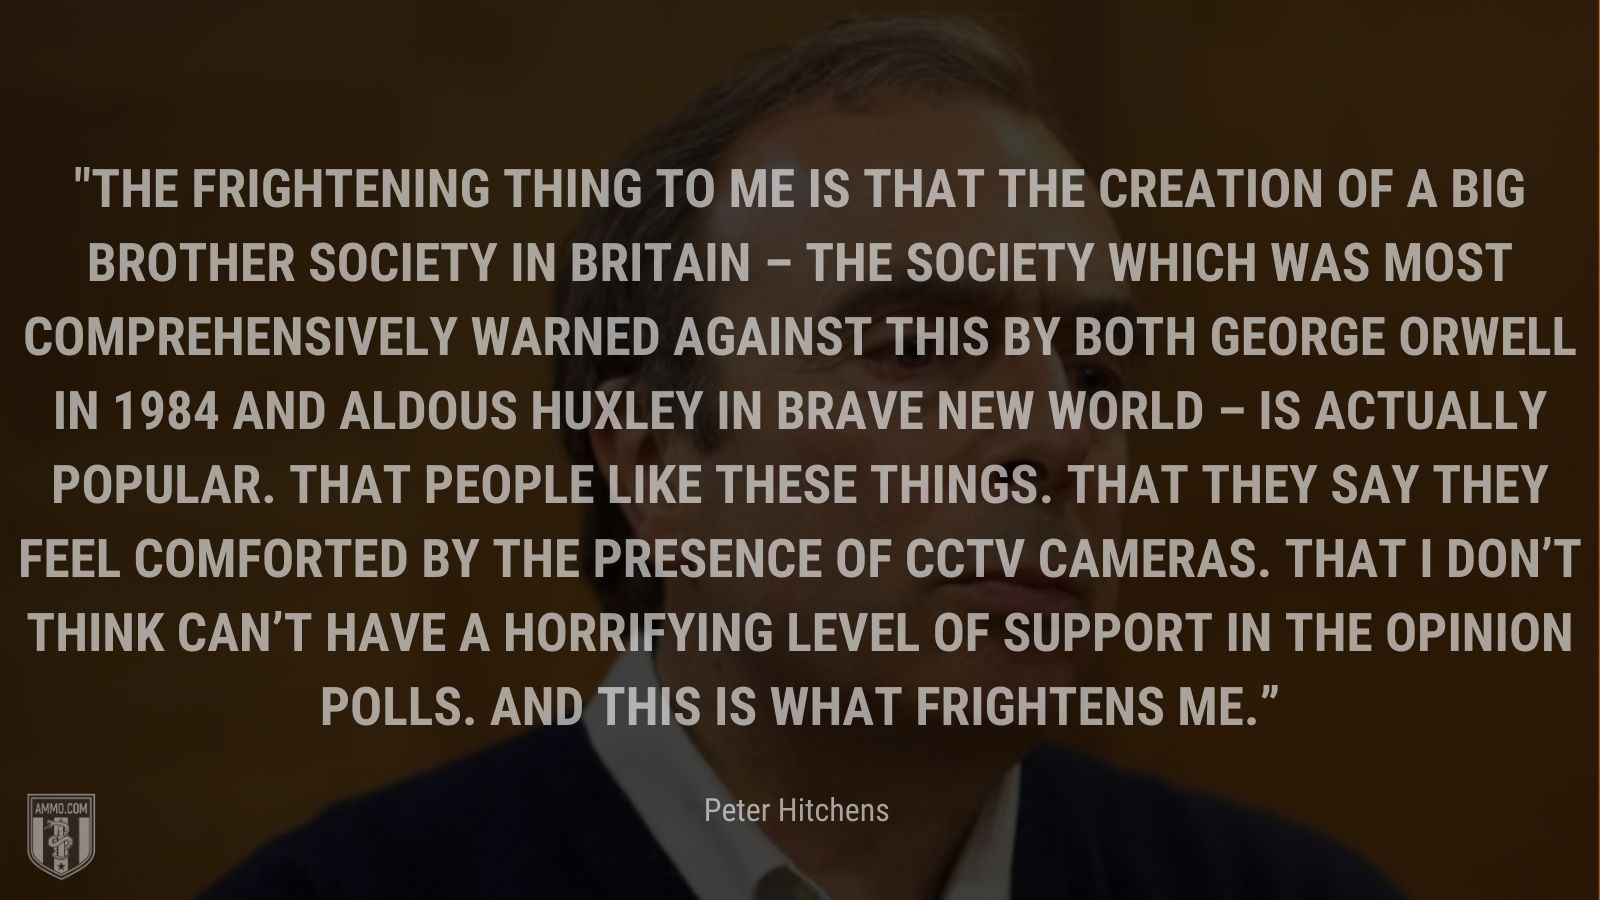 “The frightening thing to me is that the creation of a Big Brother society in Britain – the society which was most comprehensively warned against this by both George Orwell in 1984 and Aldous Huxley in Brave New World – is actually popular. That people like these things. That they say they feel comforted by the presence of CCTV cameras. That I don’t think can’t have a horrifying level of support in the opinion polls. And this is what frightens me.” - Peter Hitchens